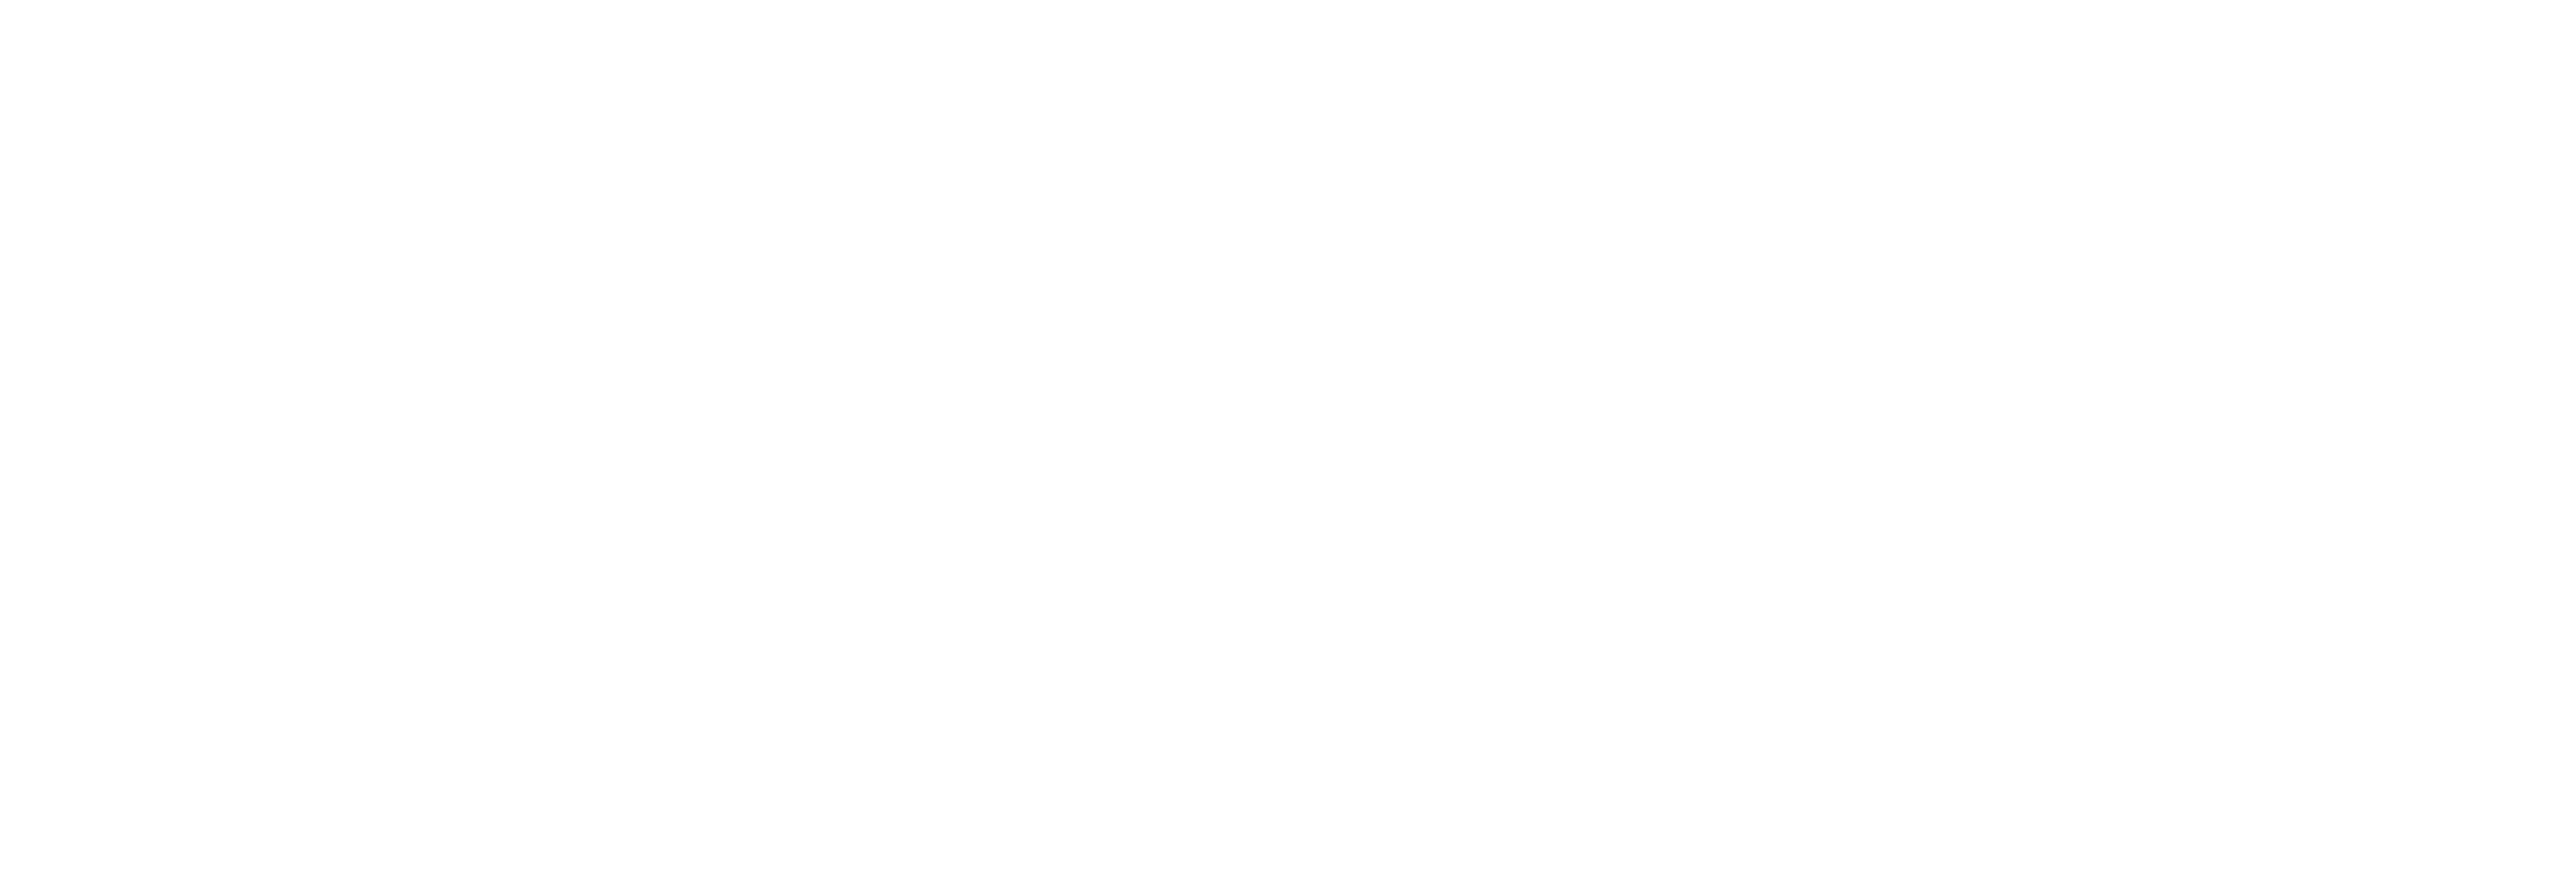 Best Price Recycling